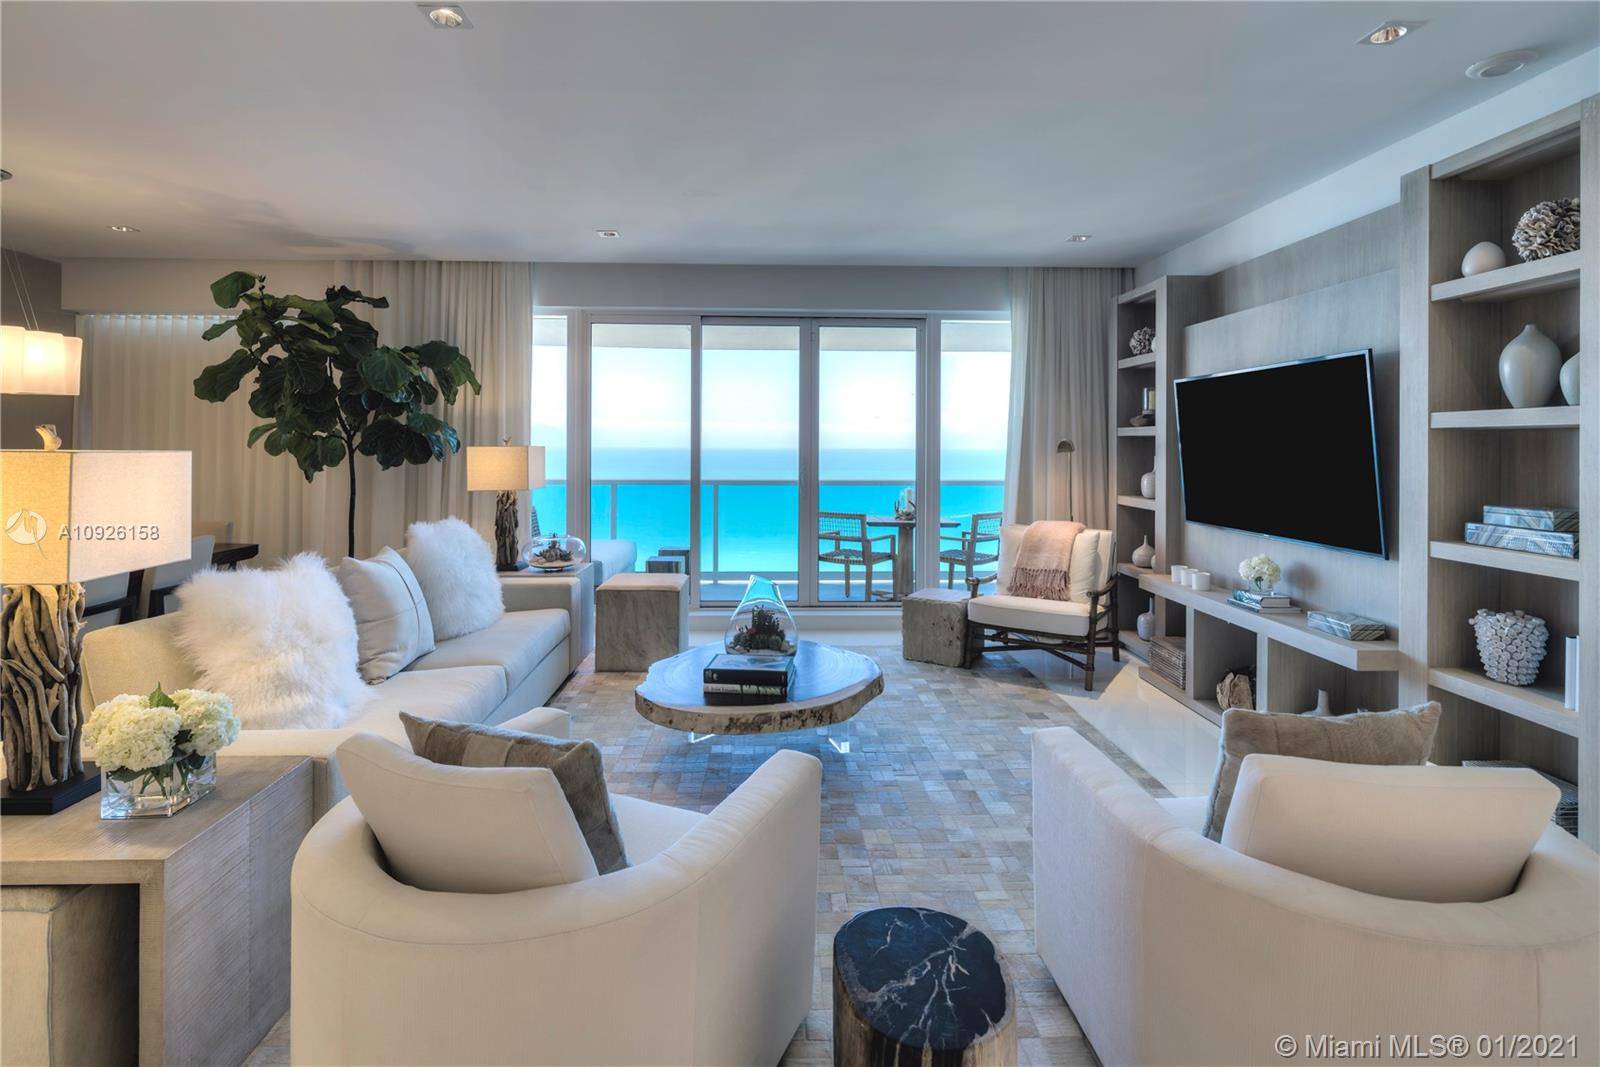 A true Penthouse at the luxurious 1 Hotel Homes South Beach.